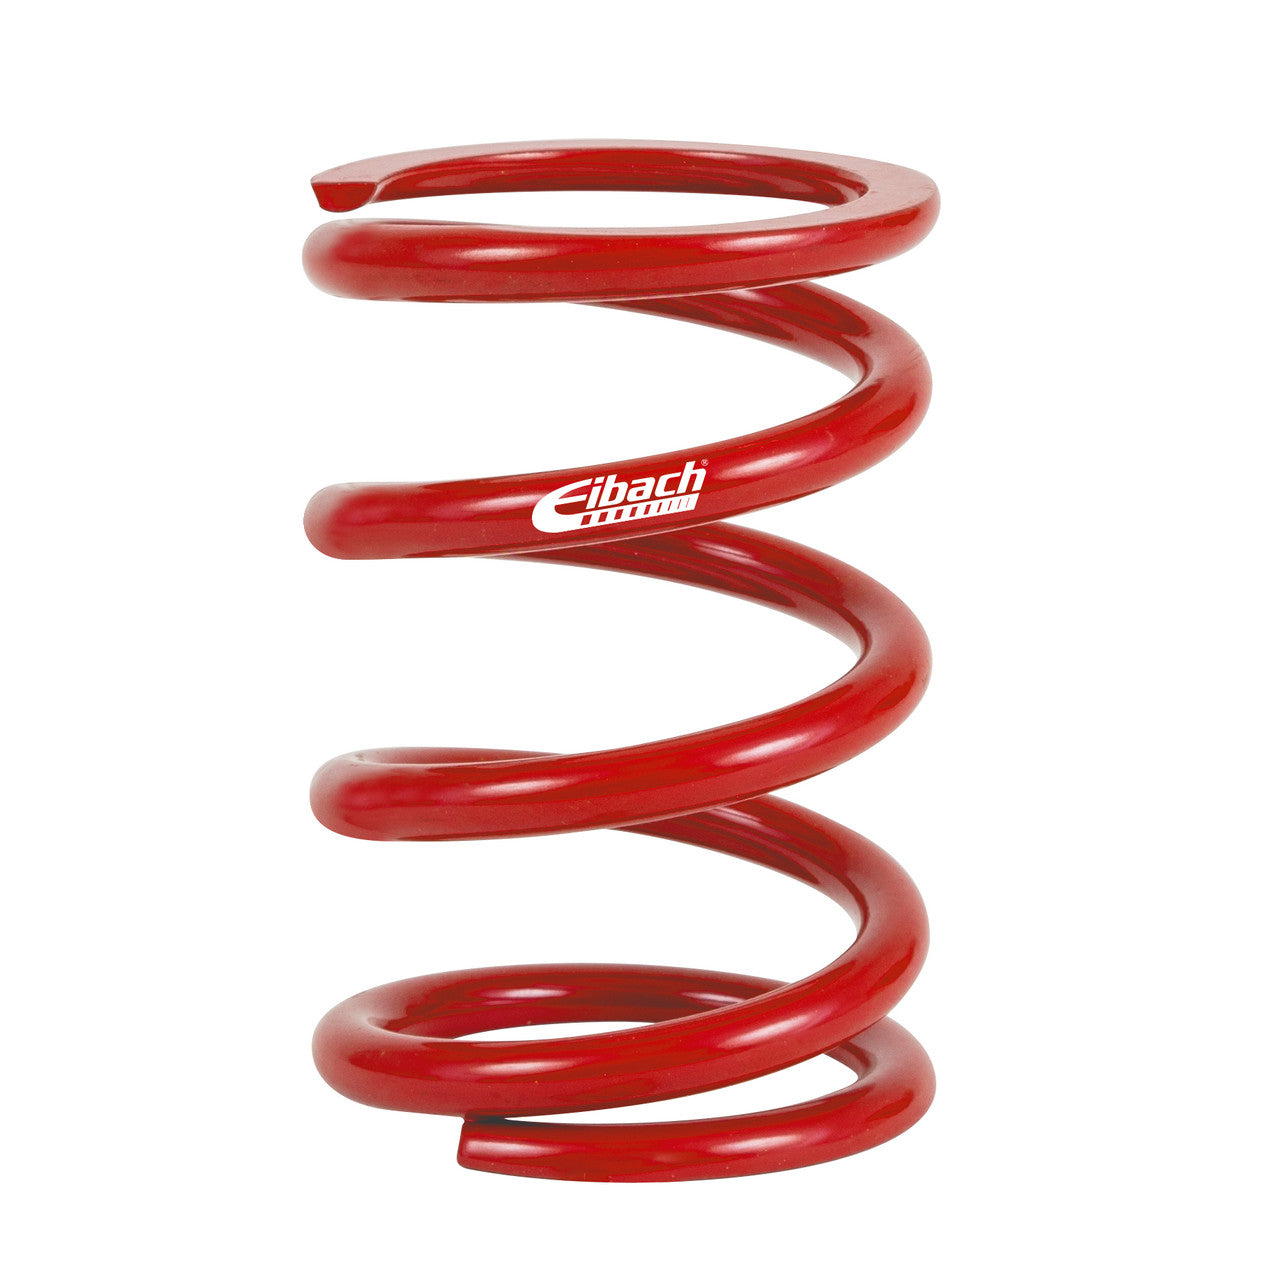 Eibach Metric Coilover Spring - 60MM I.D. 120-60-0160